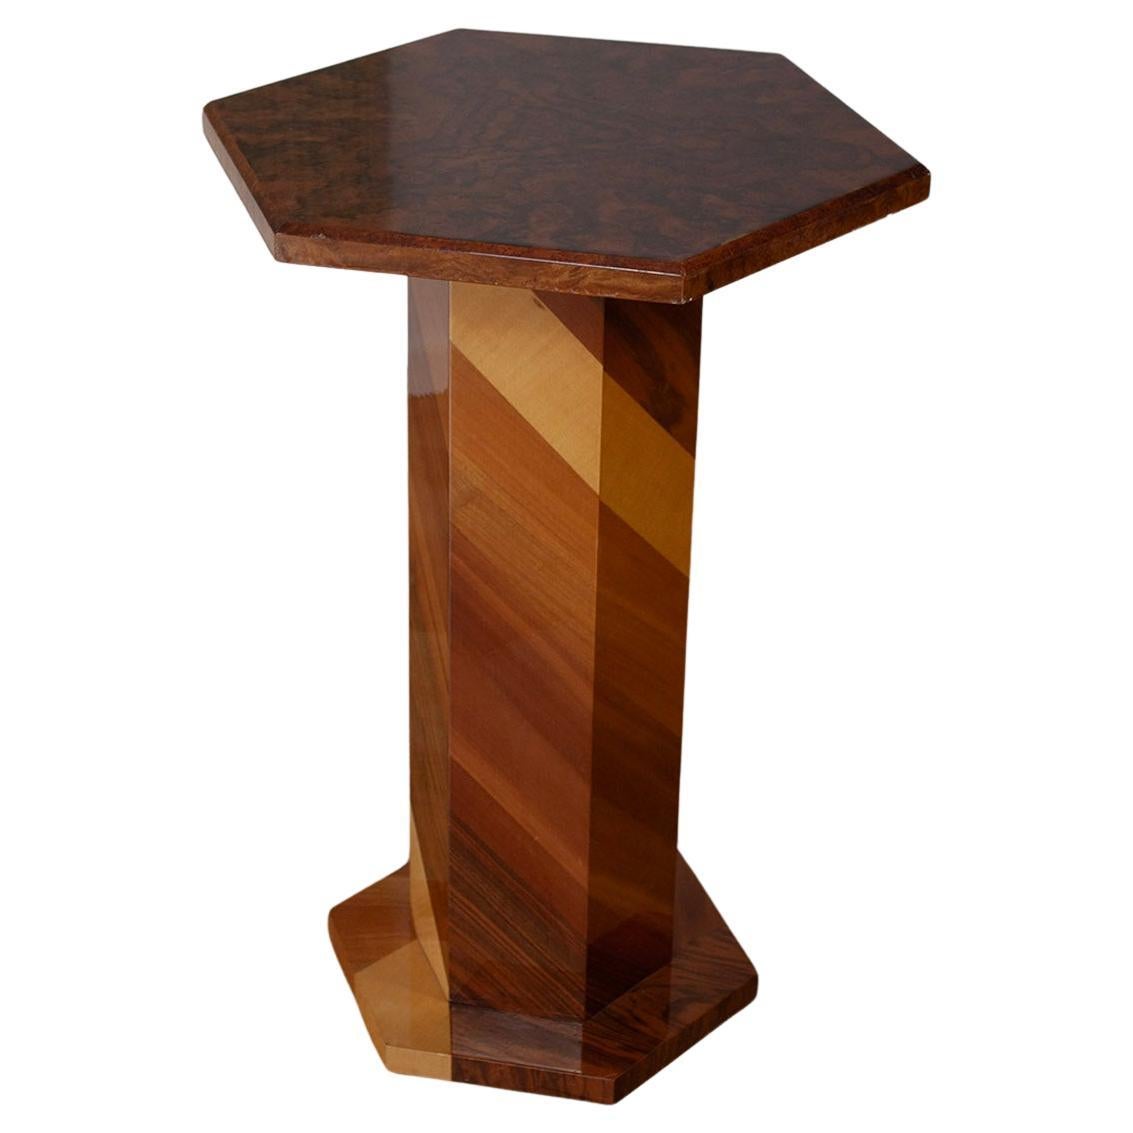 Striped Artisan Made Wooden Column Table Side Table Pedestal with Burl wood Top For Sale